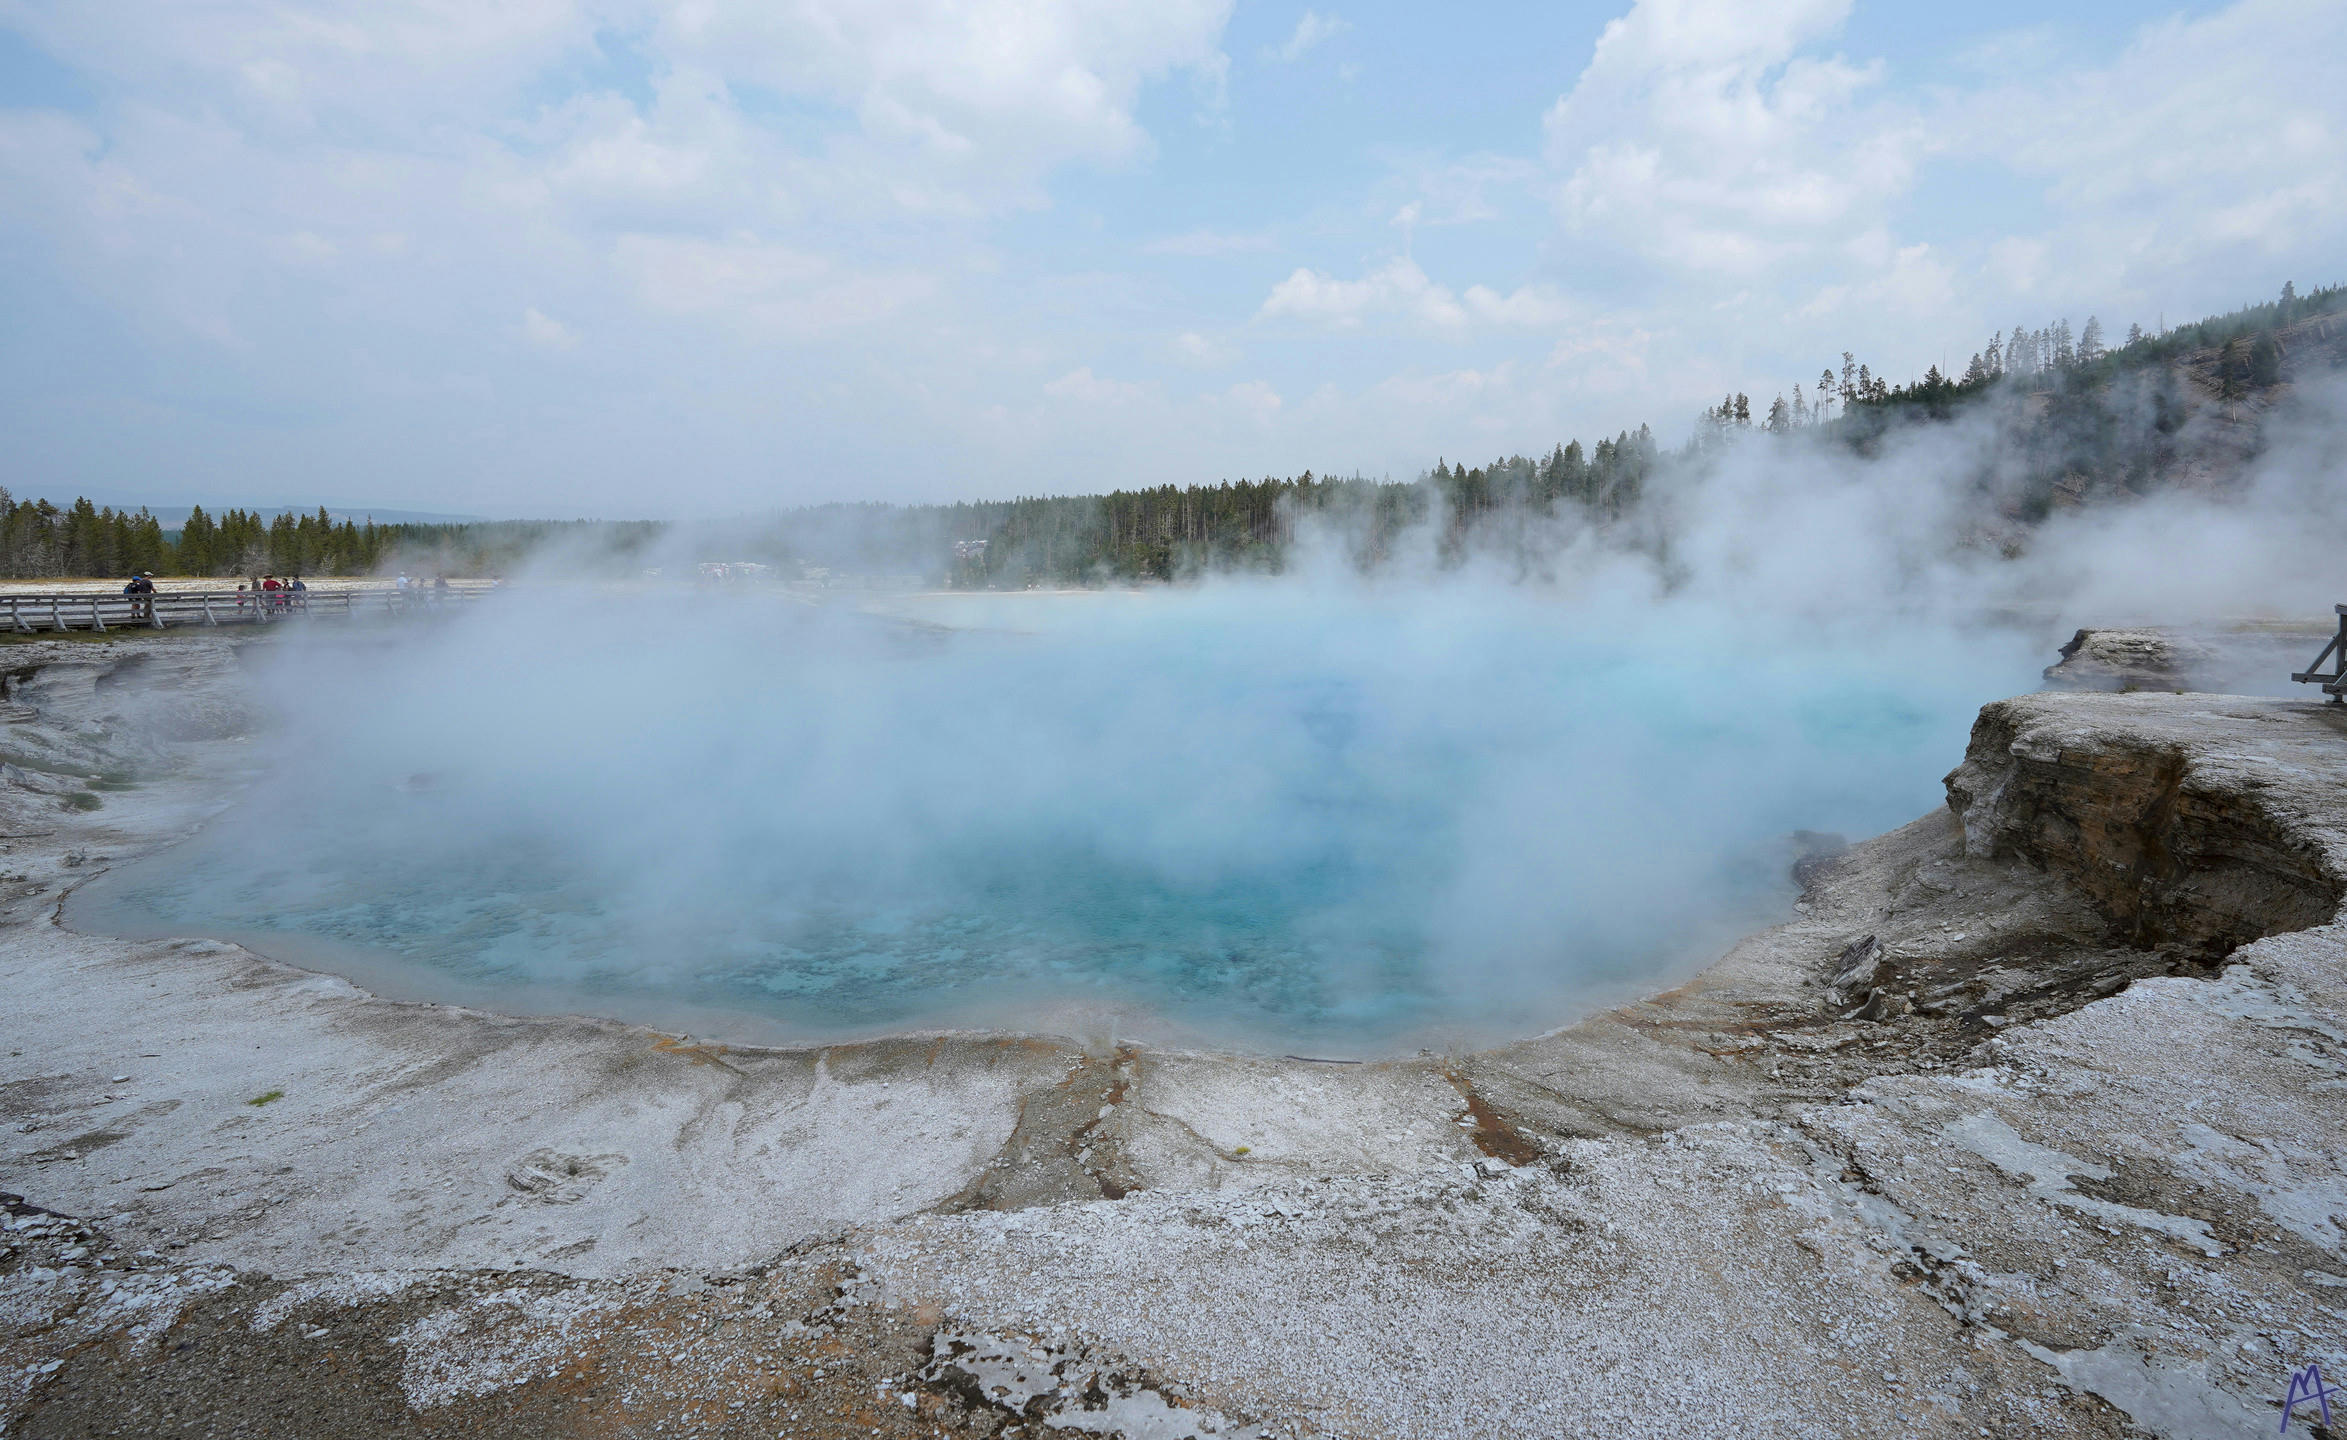 Cloud of steam from a very blue hot spring at Yellowstone